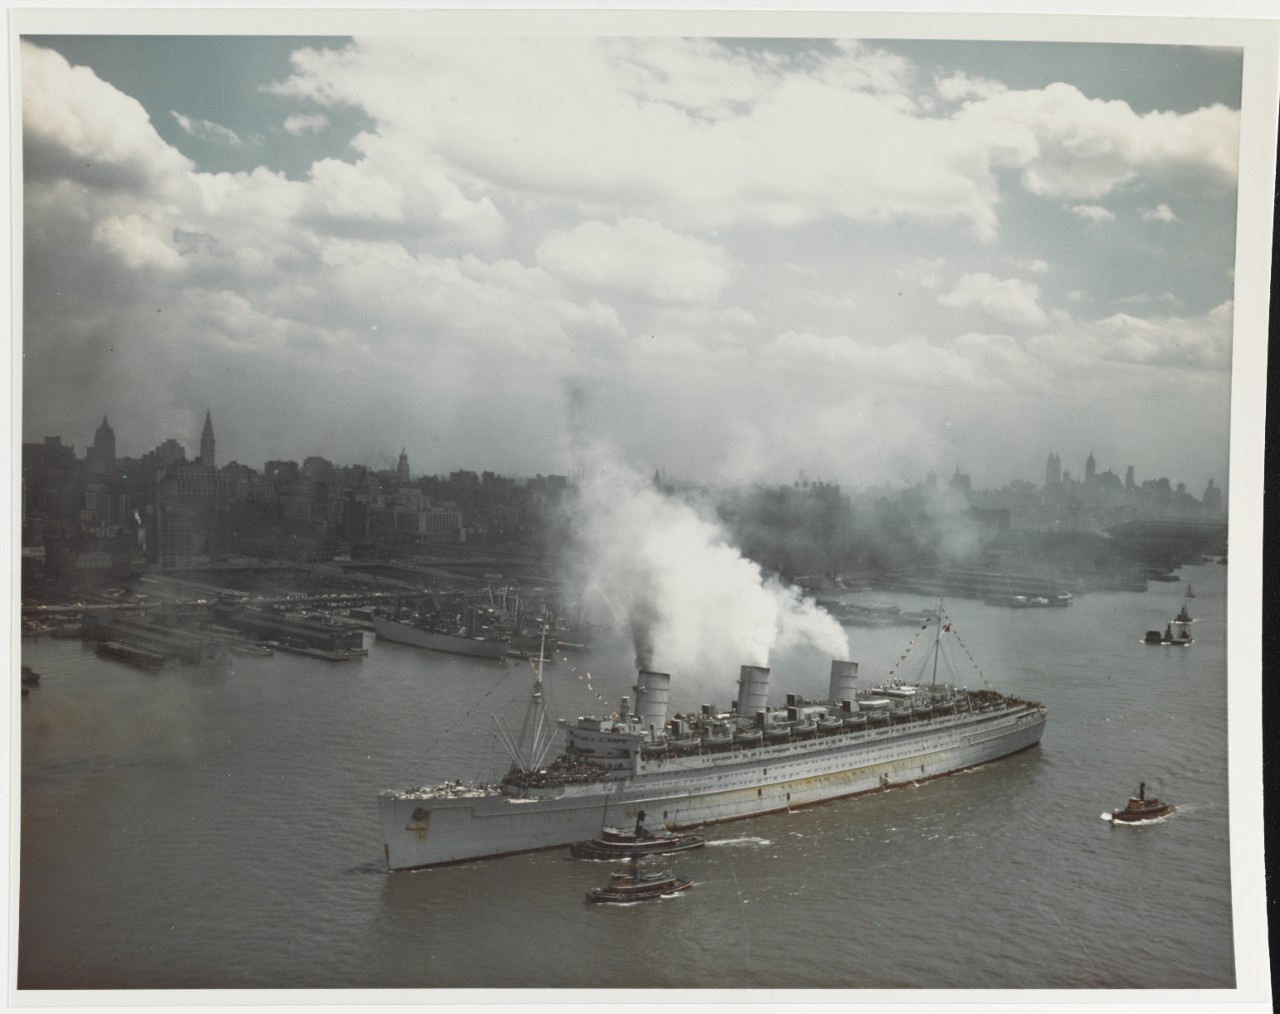 QUEEN MARY arrives in New York City, thousands of U.S. troops on board, 20 June 1945